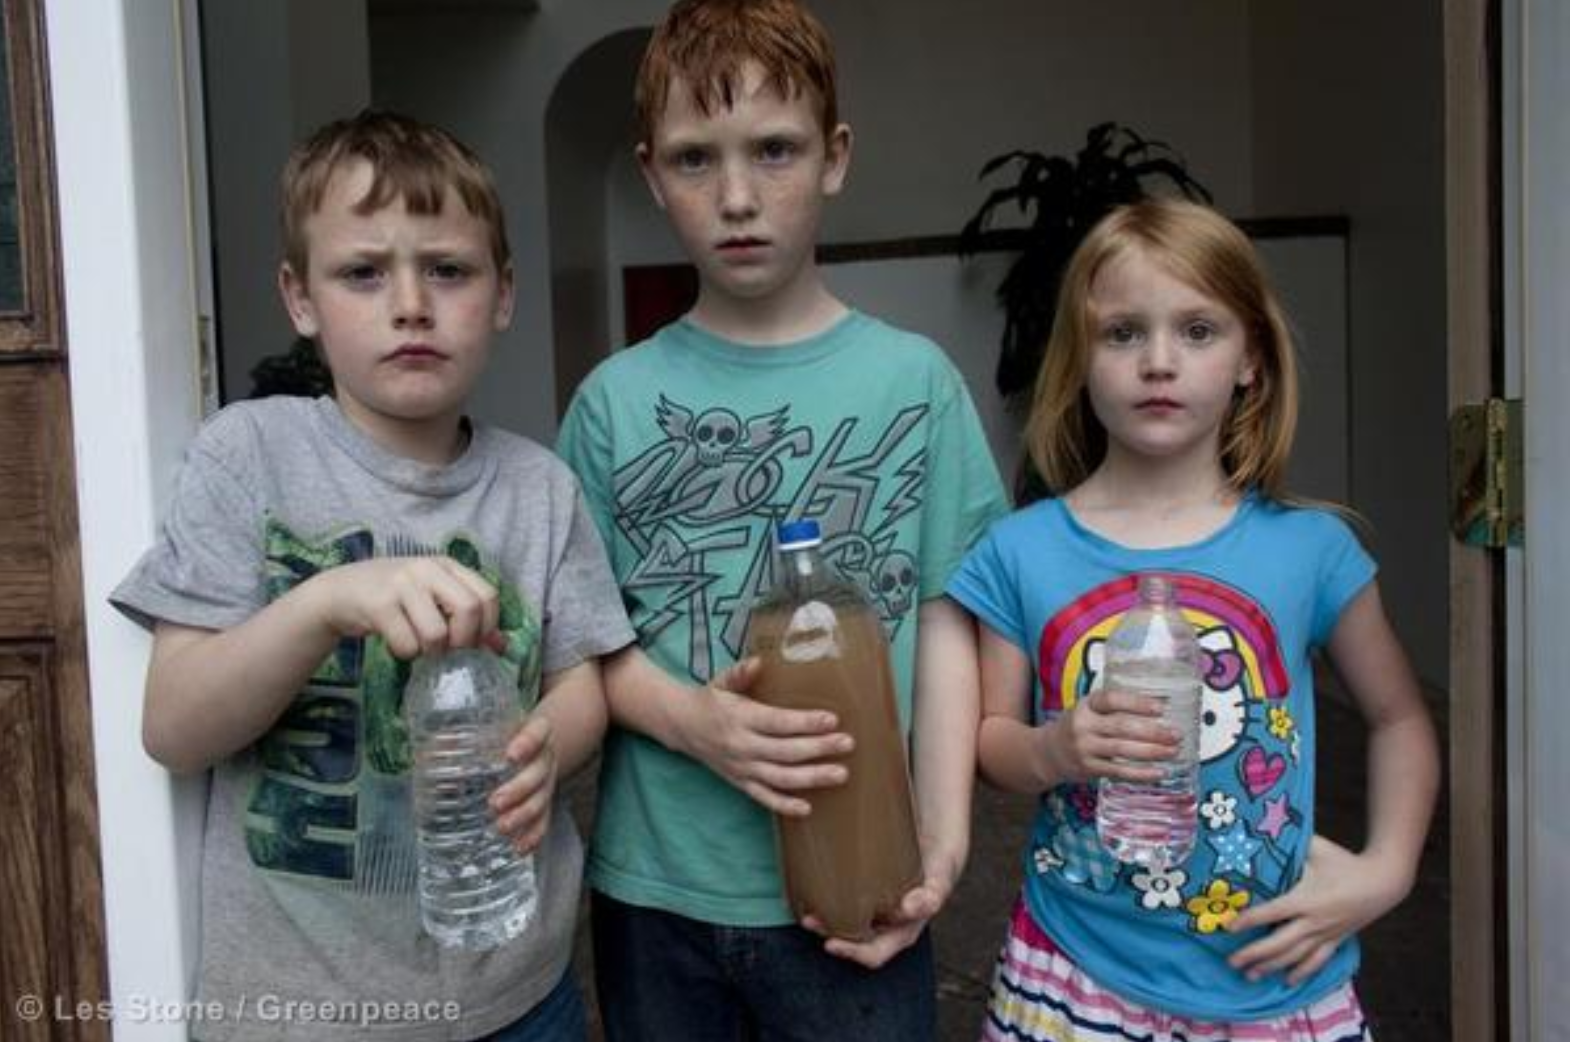 Jessica, Justin, and Joshua Ely hold bottles of water at their house in Dimock. The one at center is contaminated water from their tap.